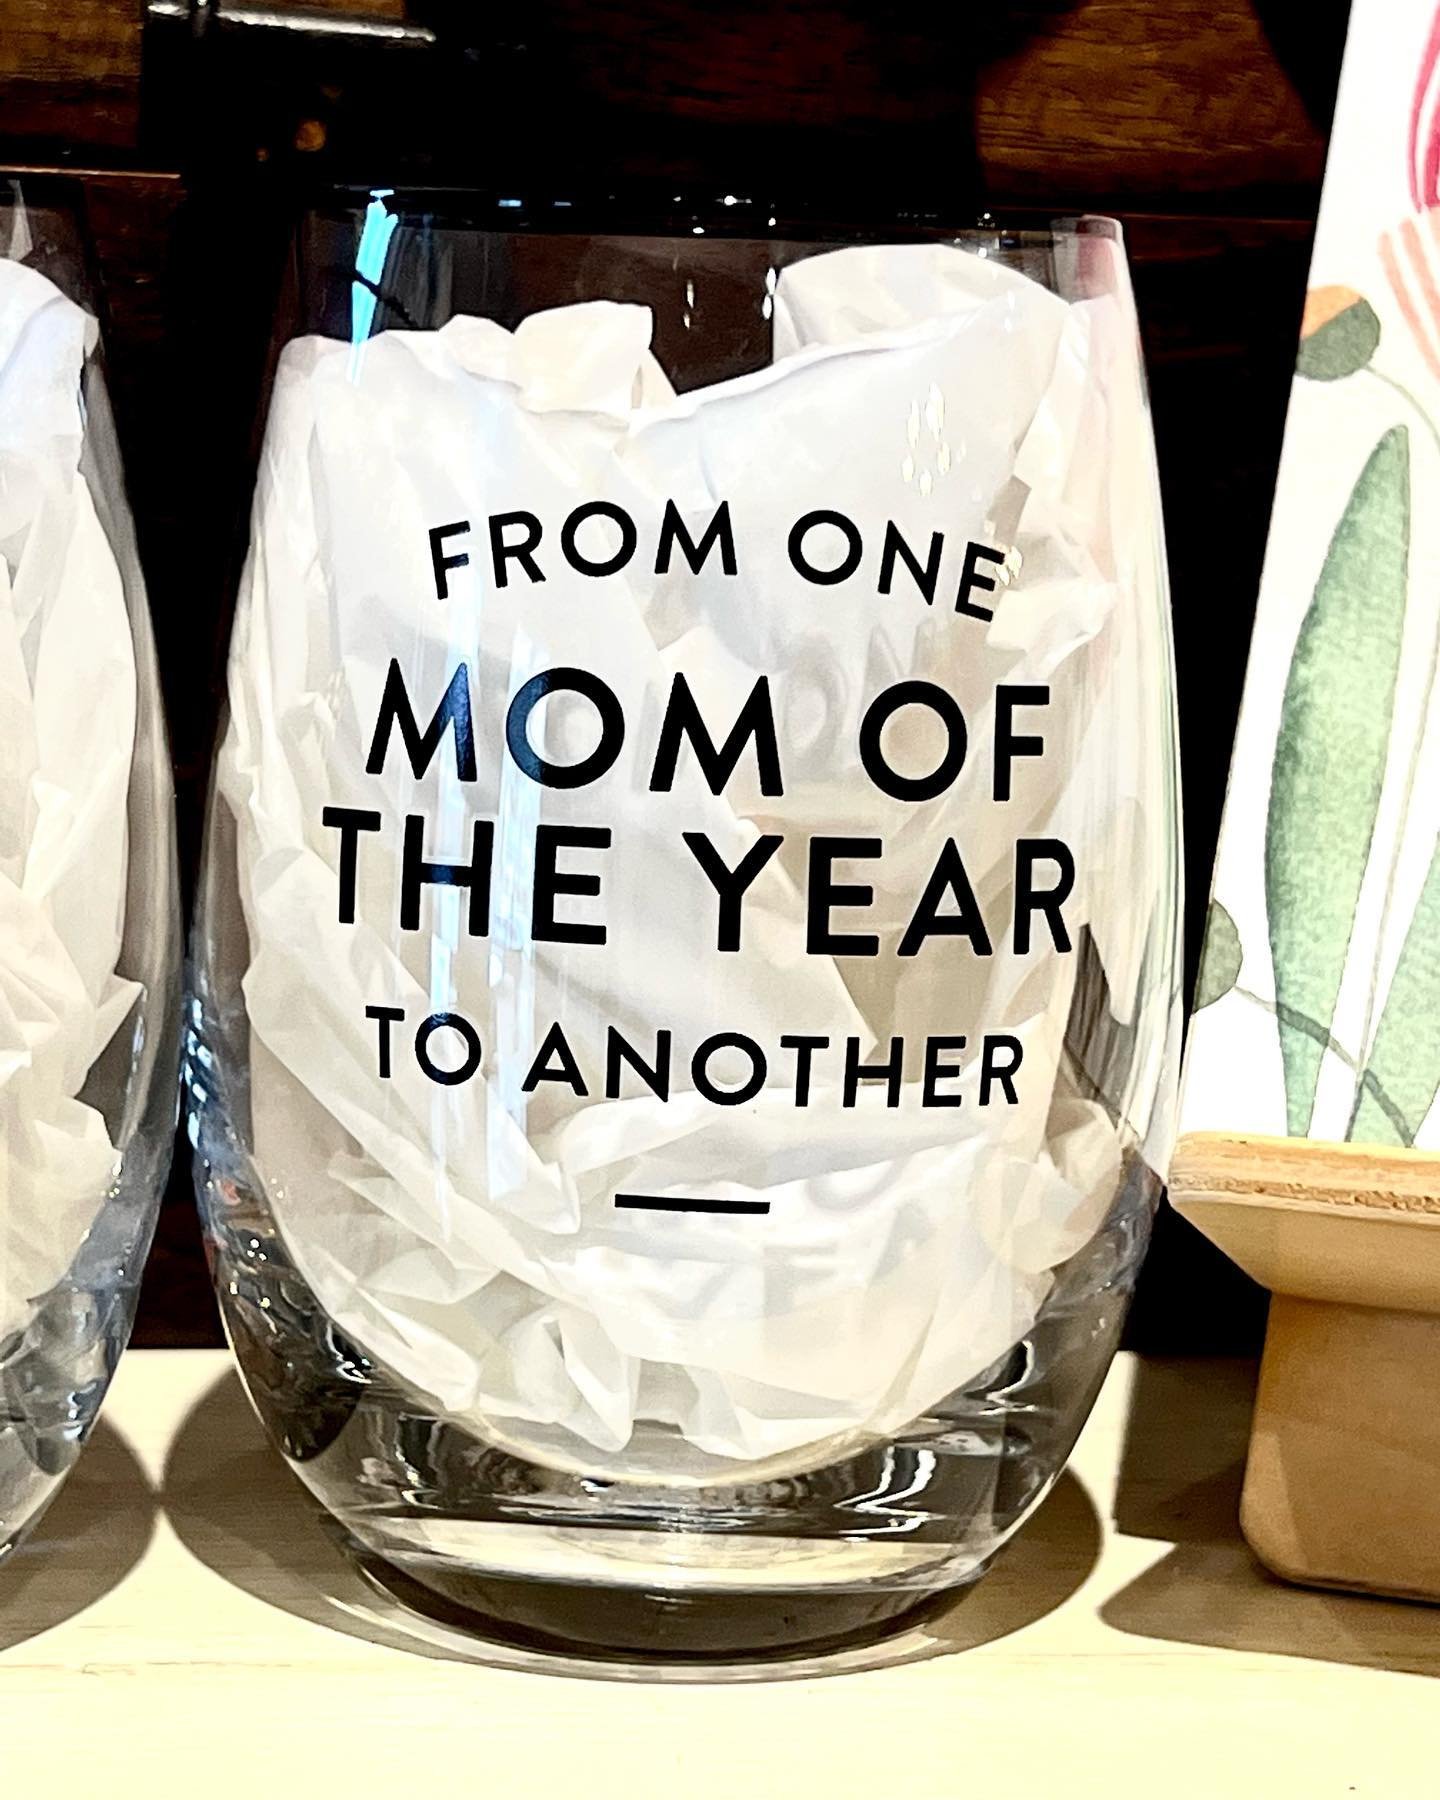 Grab your mom friends and stop in on Wednesday for our 11th anniversary celebration! Open until 8:30pm!
One lucky customer will win an amazing gourmet gift tote filled with local treasures- you really don&rsquo;t want to miss this! 😎